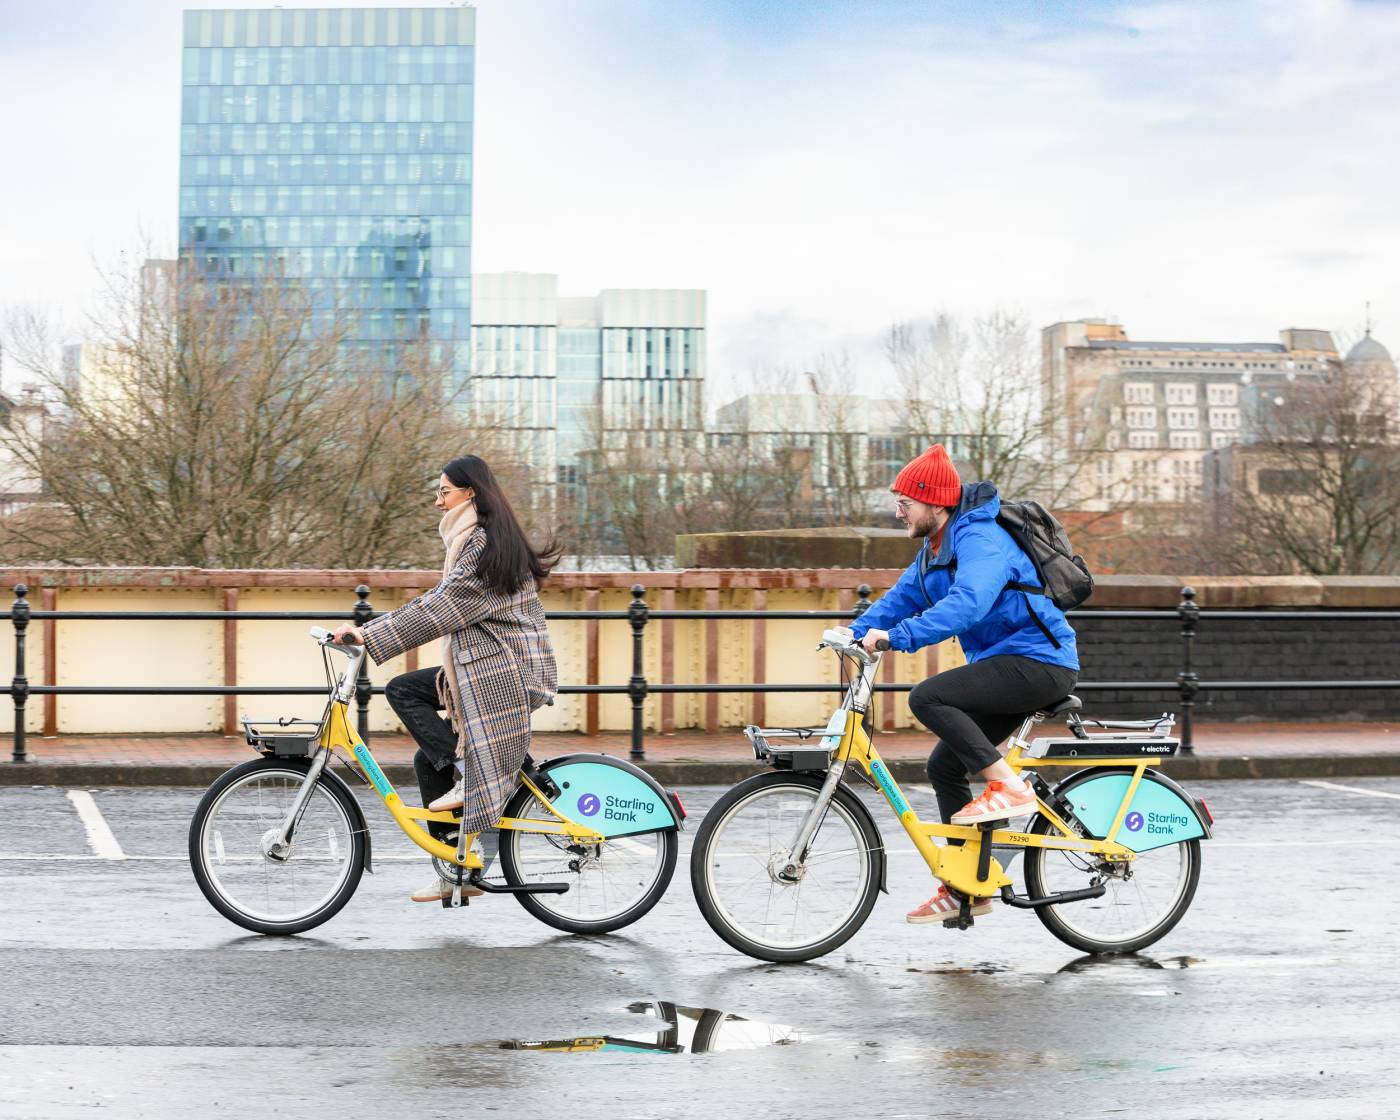 Two people riding Starling Bank Bikes in Manchester